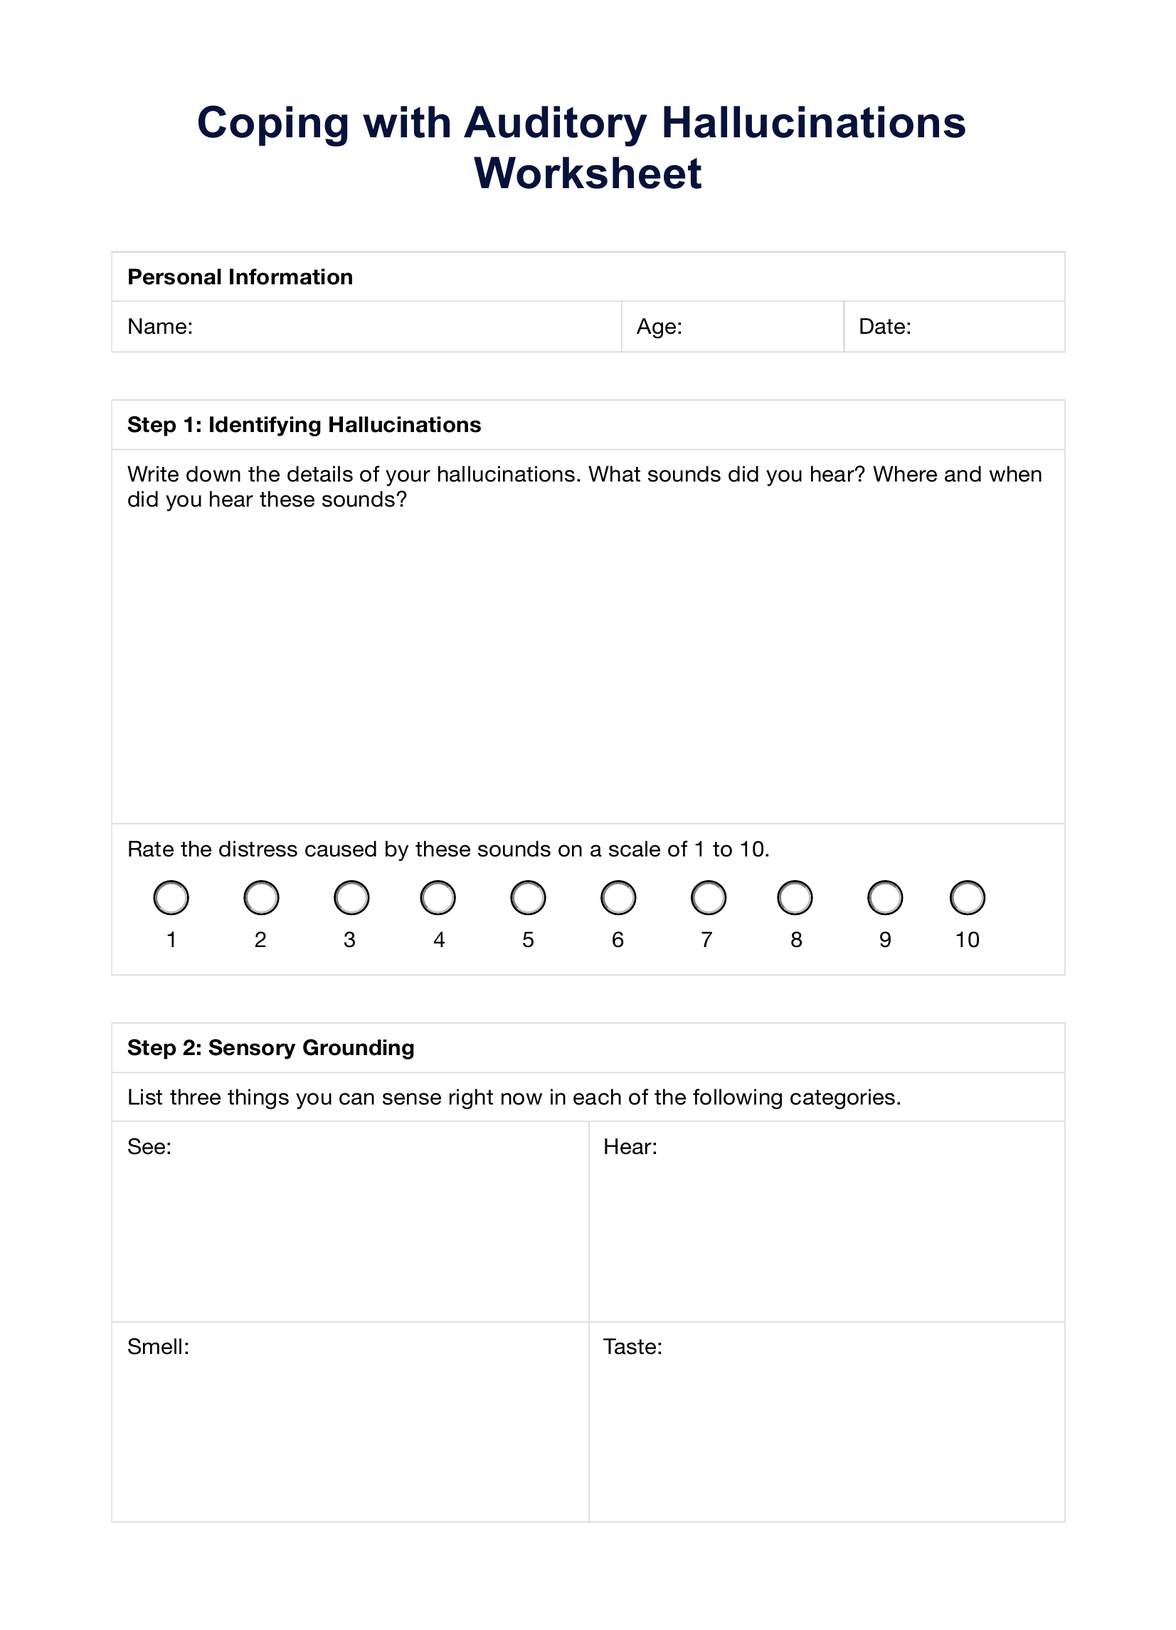 Coping with Auditory Hallucinations Worksheet PDF Example